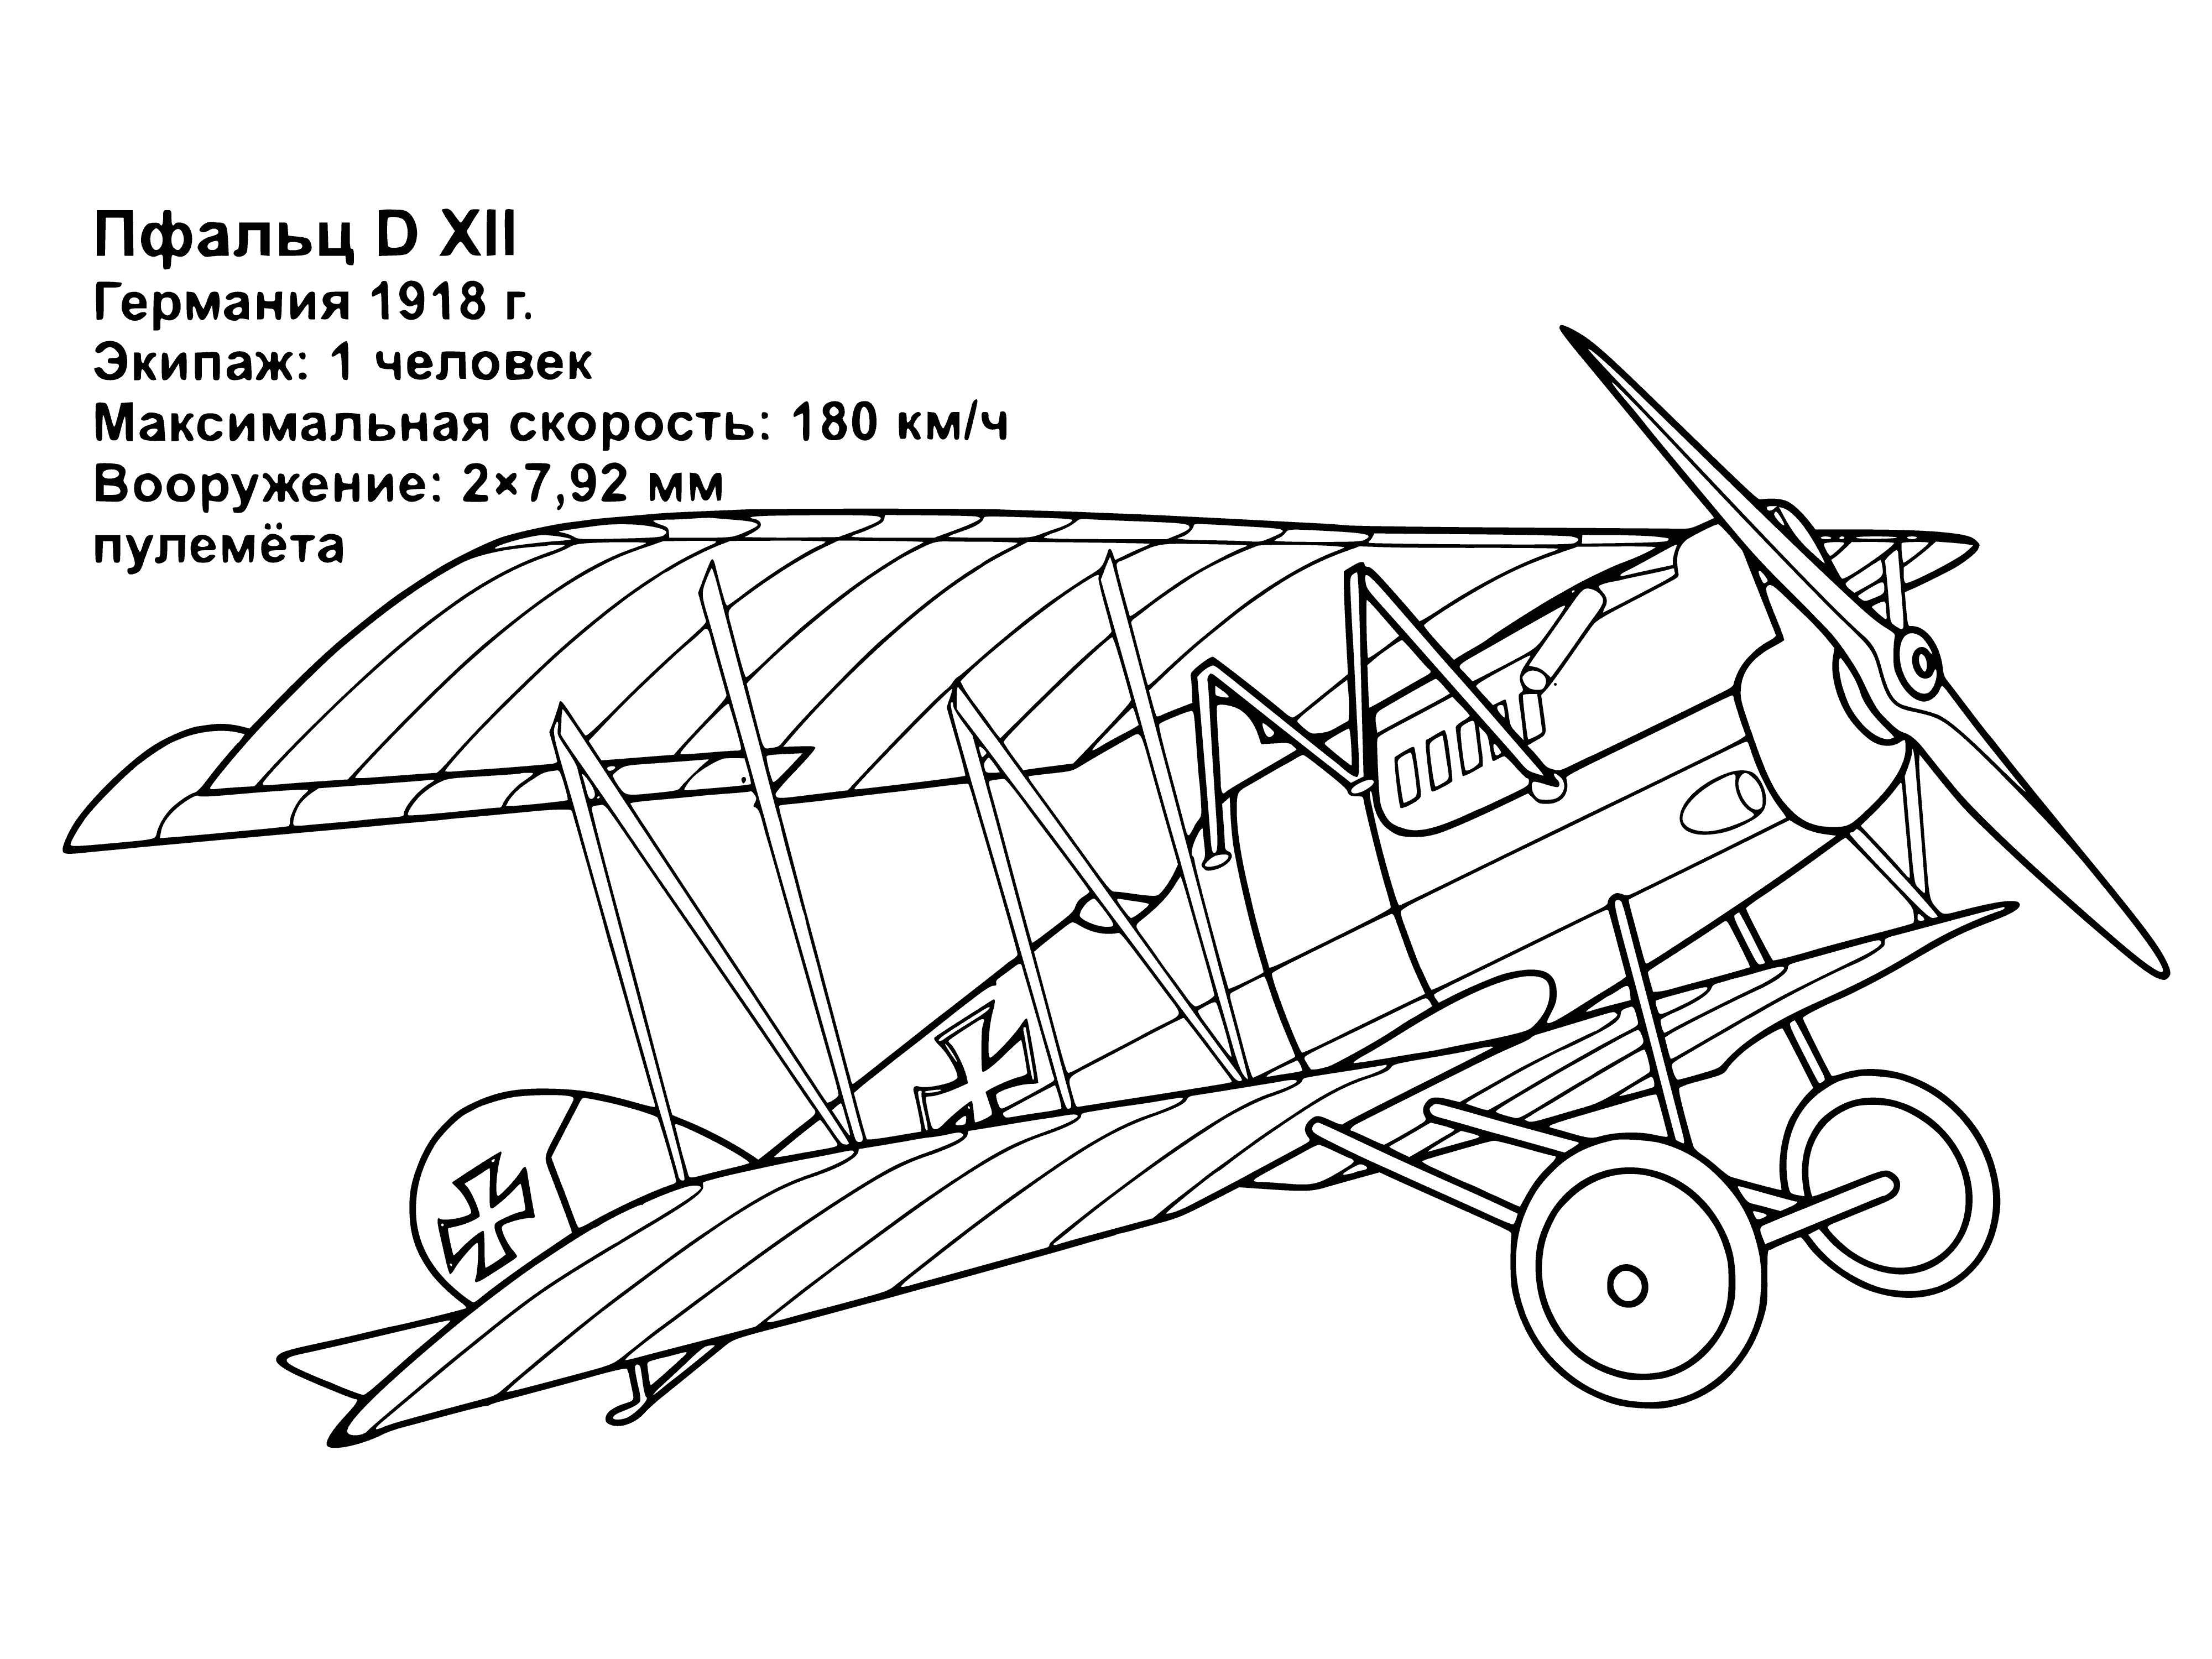 coloring page: Three German aircraft coloring page: airplane, helicopter, rocket. Airplane has wings, helicopter has top/bottom rotors, rocket has round body/pointed nose.